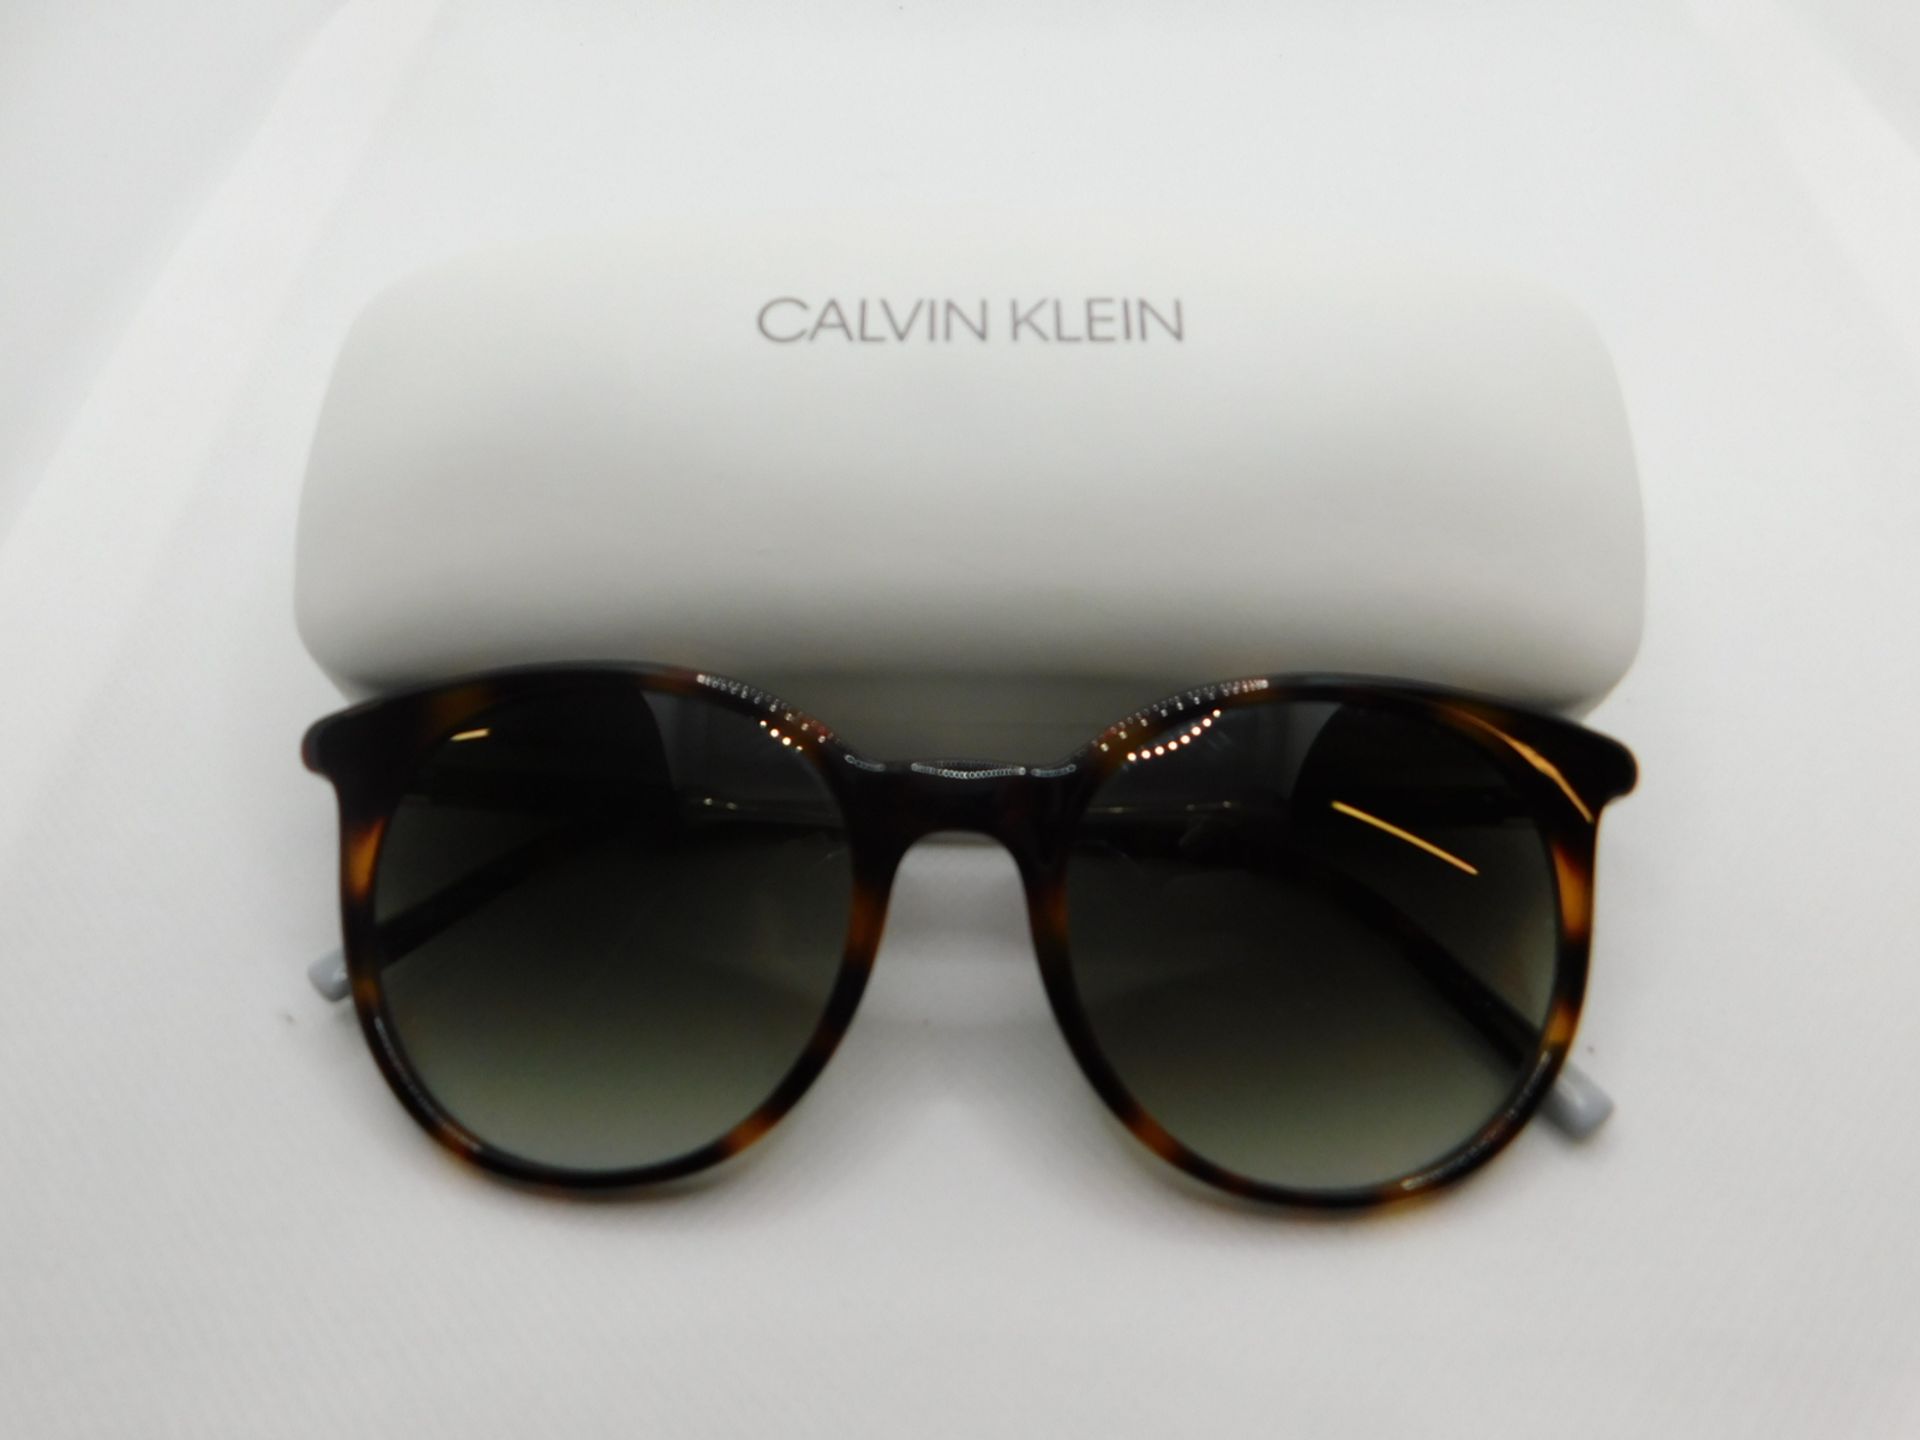 1 PAIR OF CALVIN KLEIN SUNGLASSES FRAME WITH CASE MODEL CK3208S RRP Â£129.99